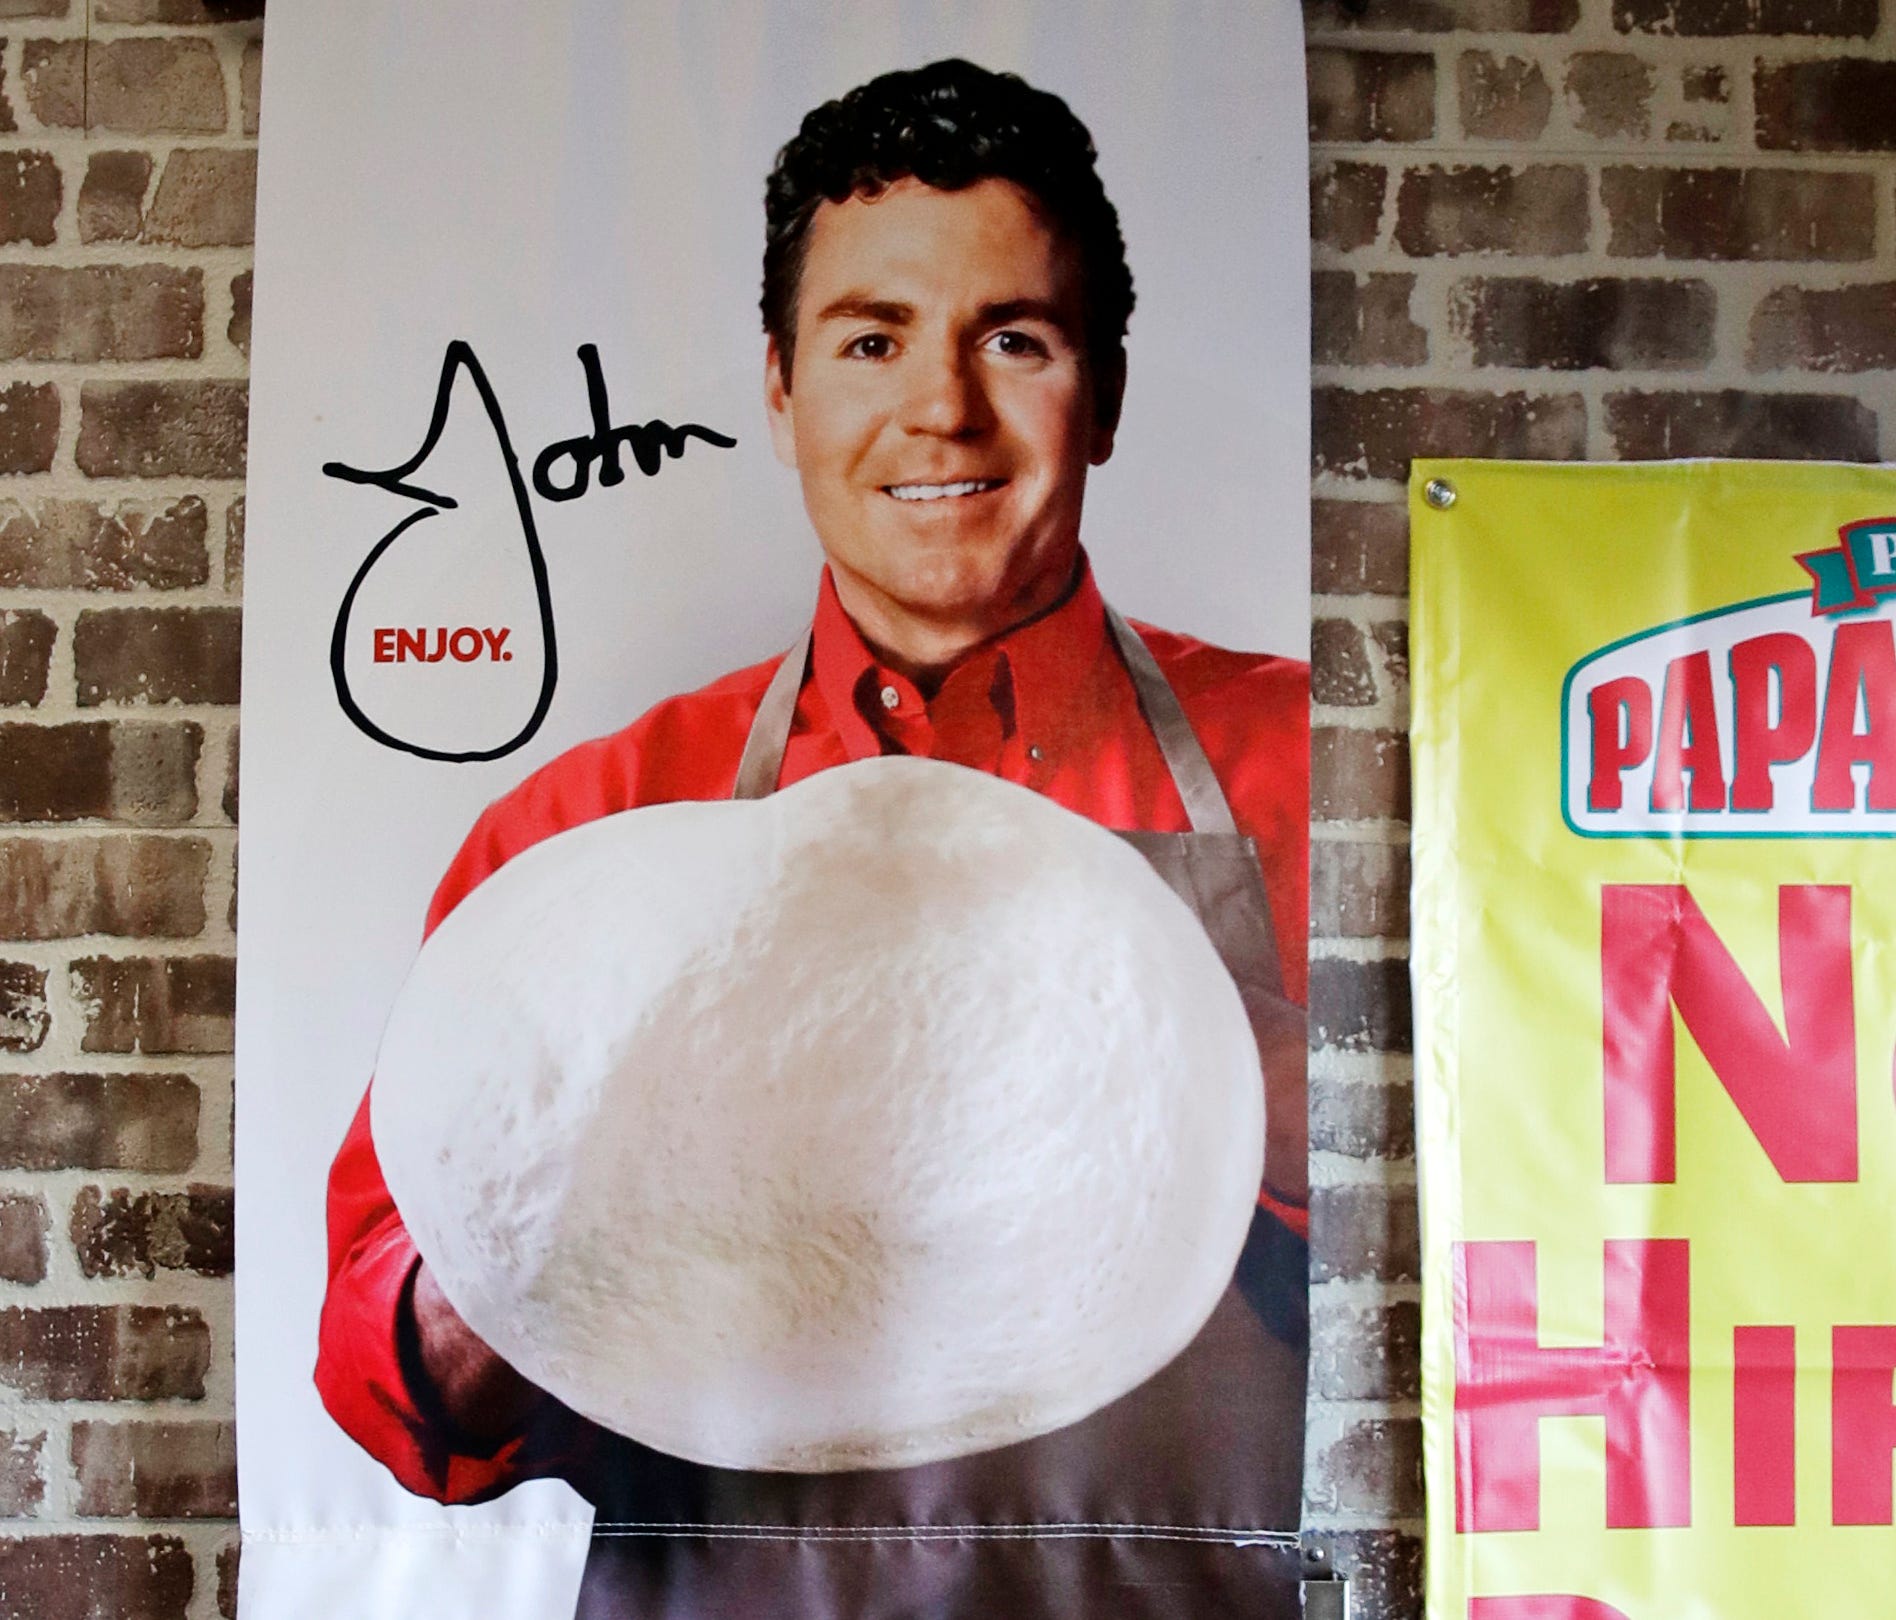 Signs, including one featuring Papa John's founder John Schnatter, at a Papa John's pizza store in Quincy, Mass. Papa John's plans to pull Schnatter's image from marketing materials after reports he used a racial slur. Schnatter apologized Wednesday,